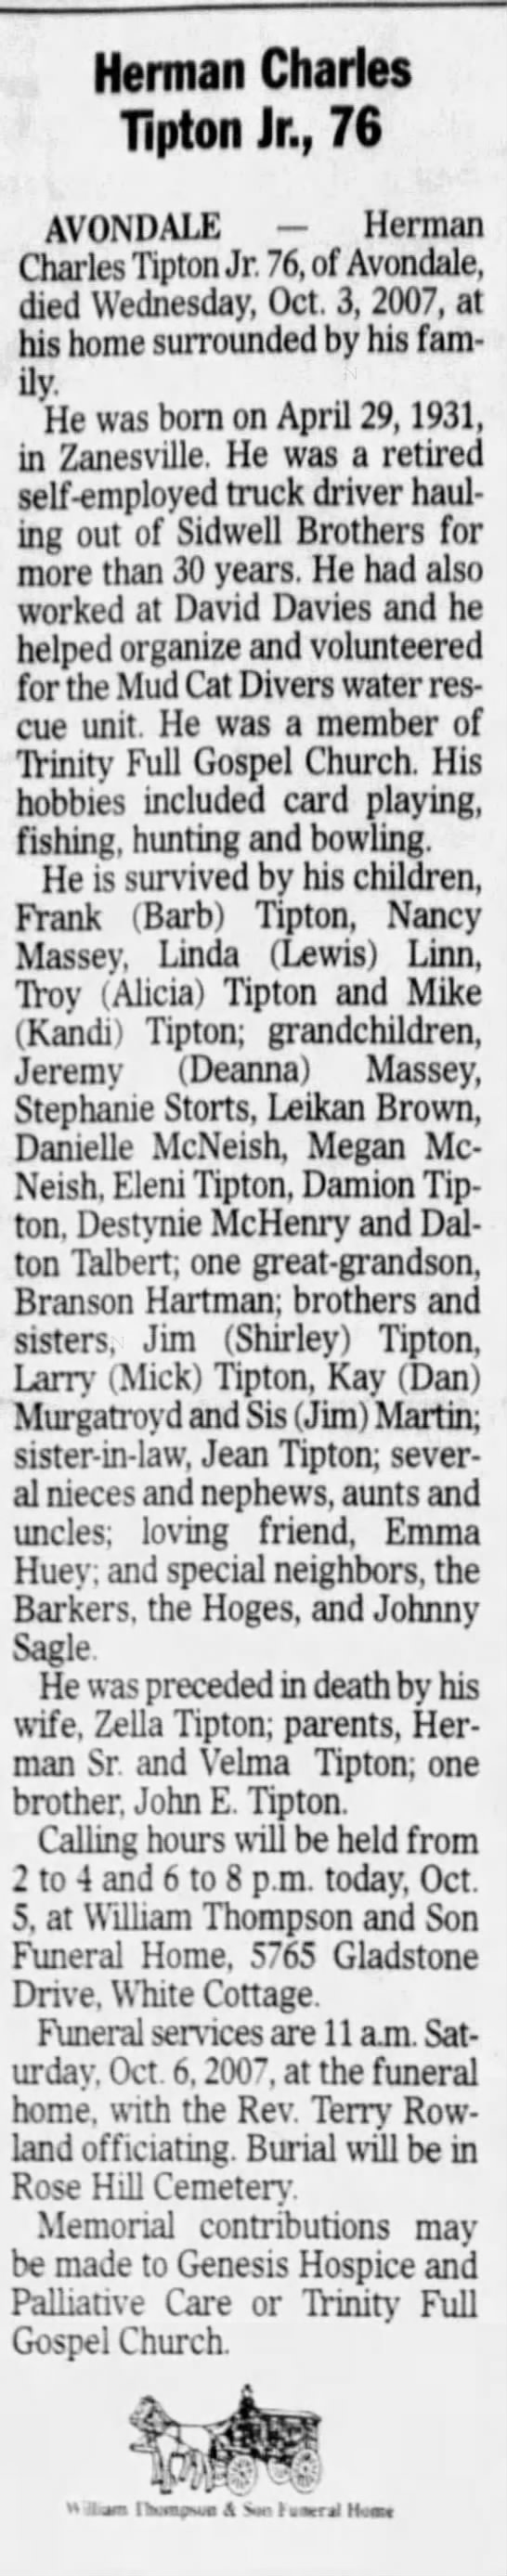 Obituary for Herman Charles Tipton, 1931-2007 (Aged 76 ...